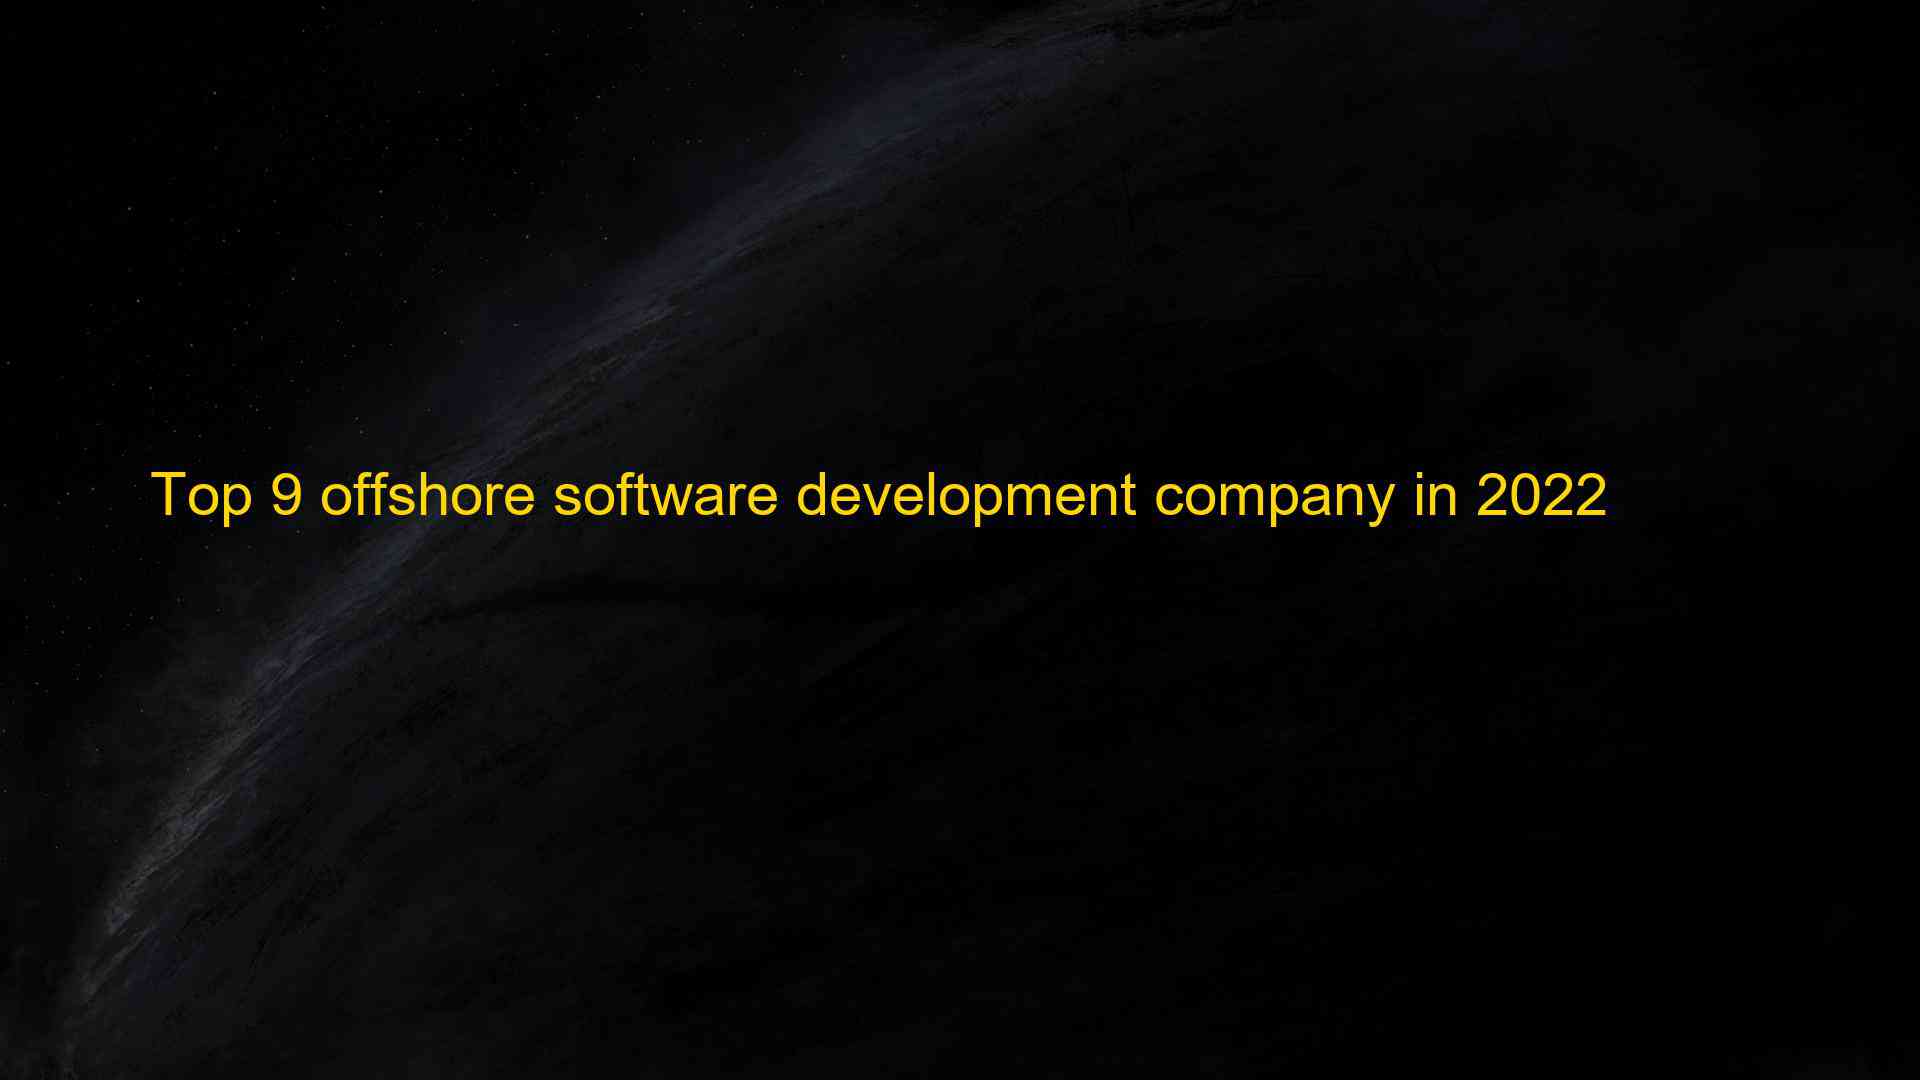 Top 9 offshore software development company in 2022 1660106856